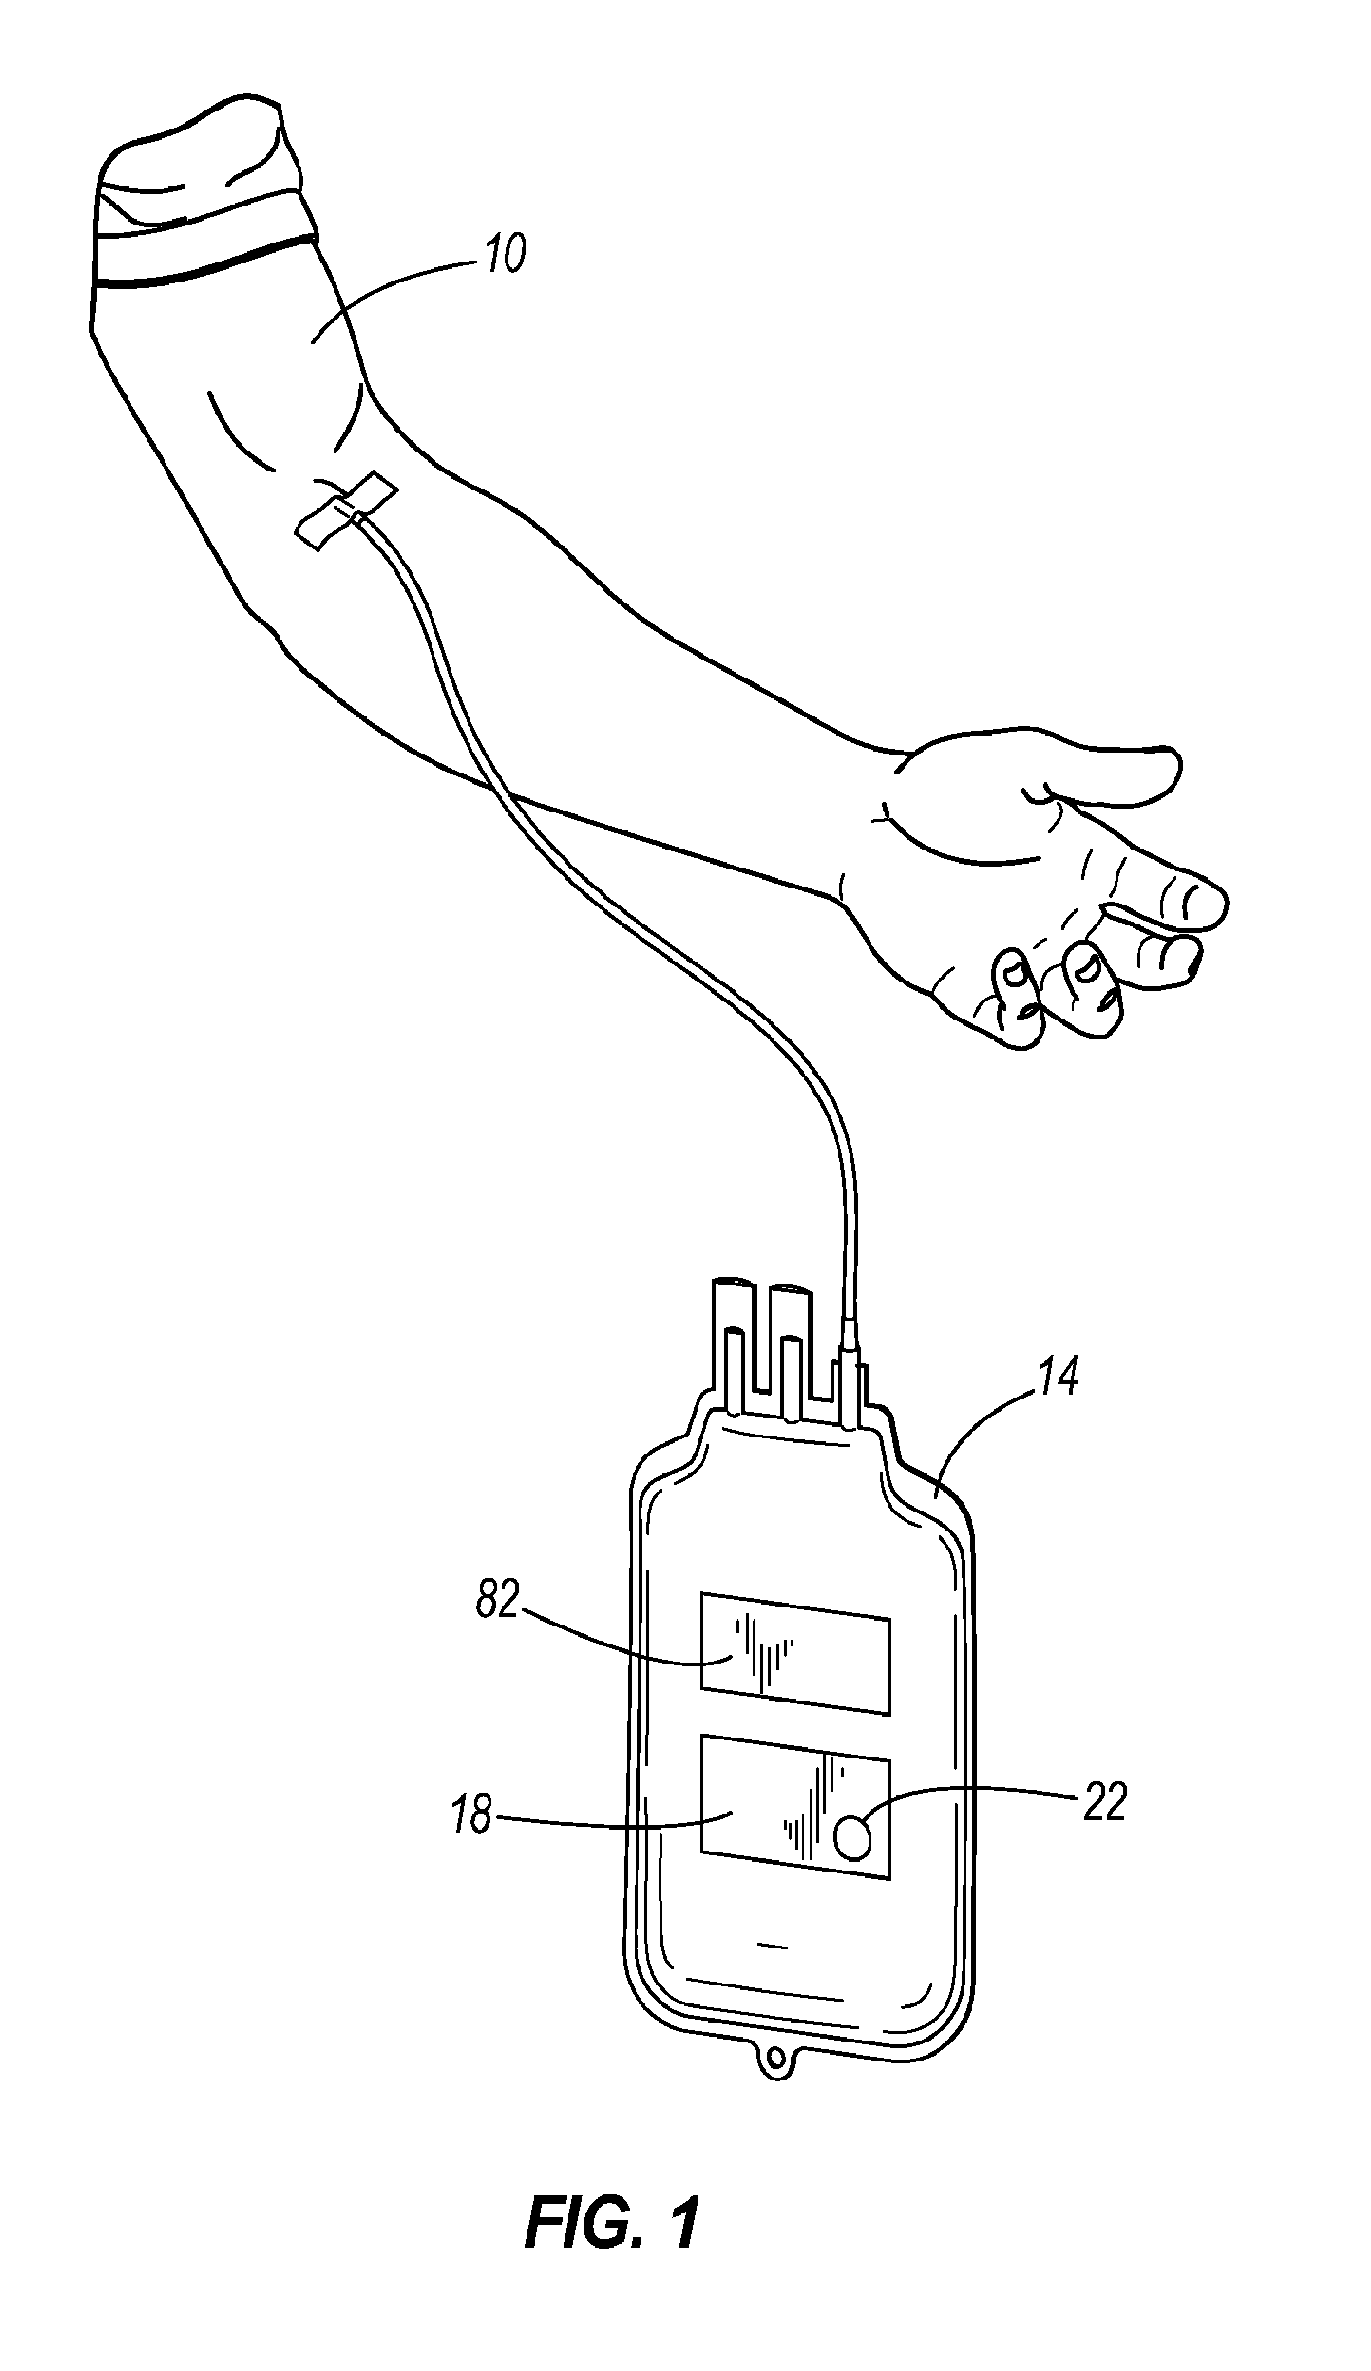 Method and apparatus for identifying and tracking biological fluid